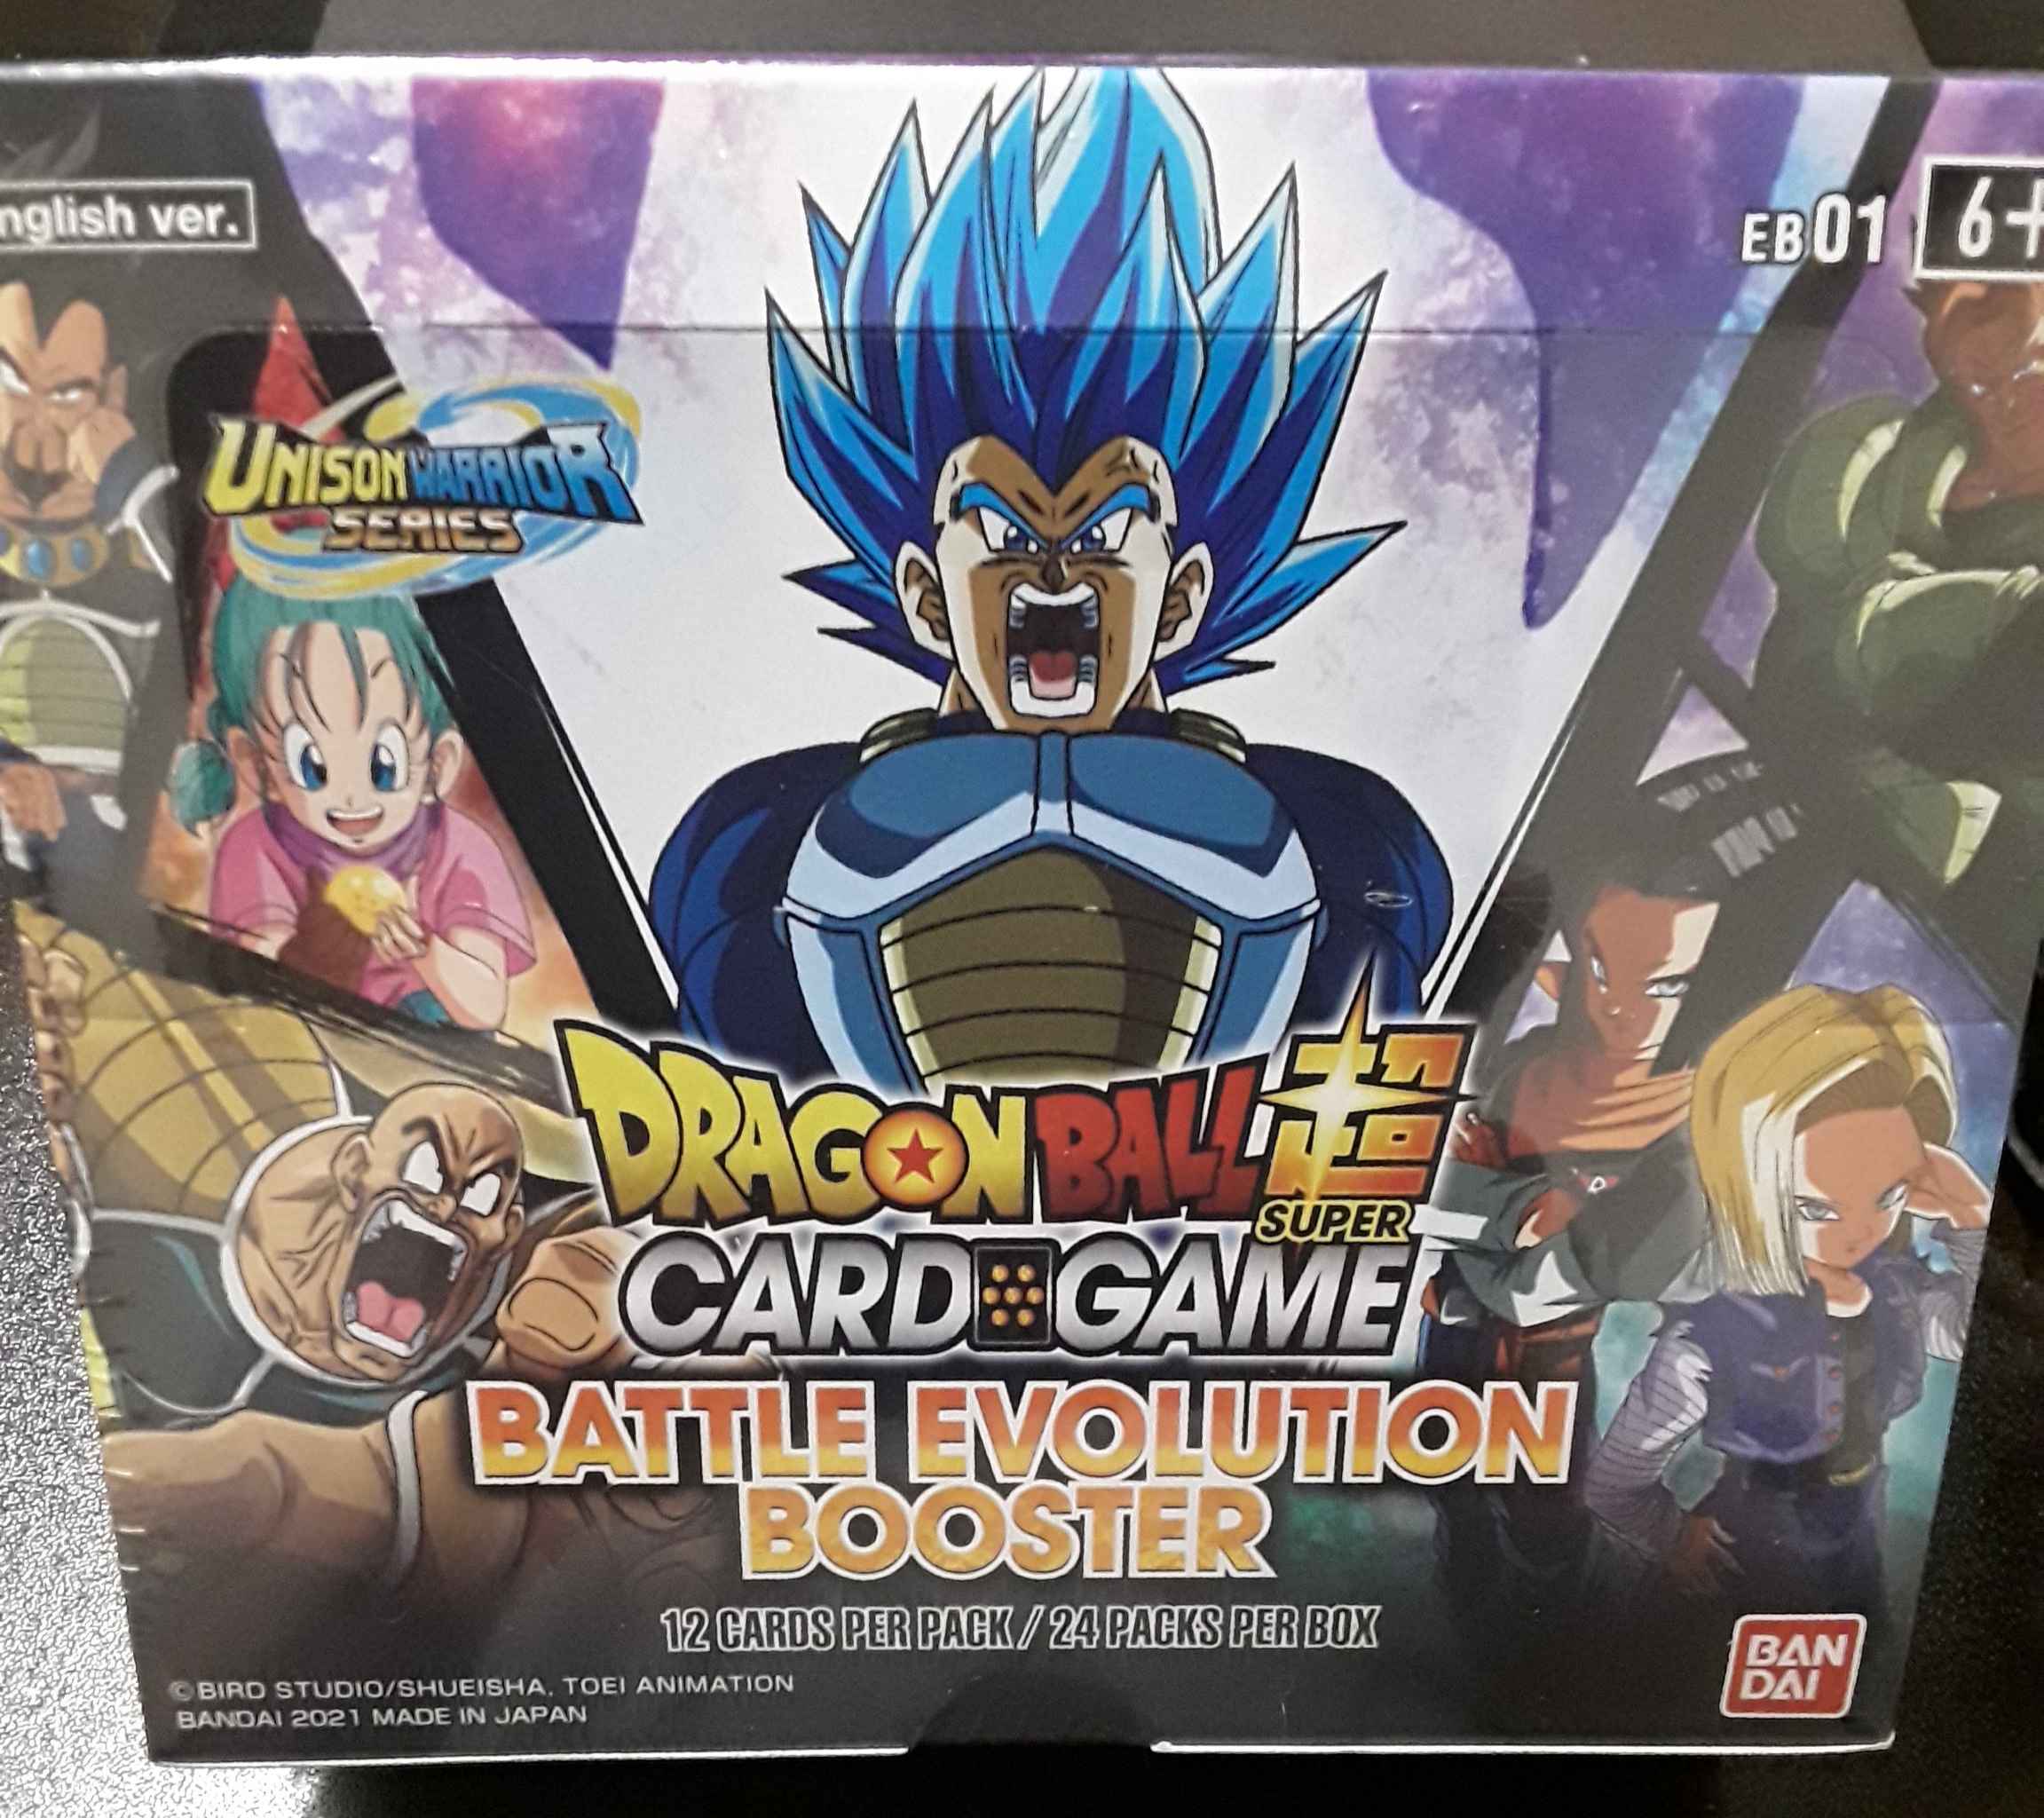 Battle Evolution Booster Box Extras Battle Evolution Booster Box Battle Evolution Booster Dragon Ball Super Ccg Online Gaming Store For Cards Miniatures Singles Packs Booster Boxes